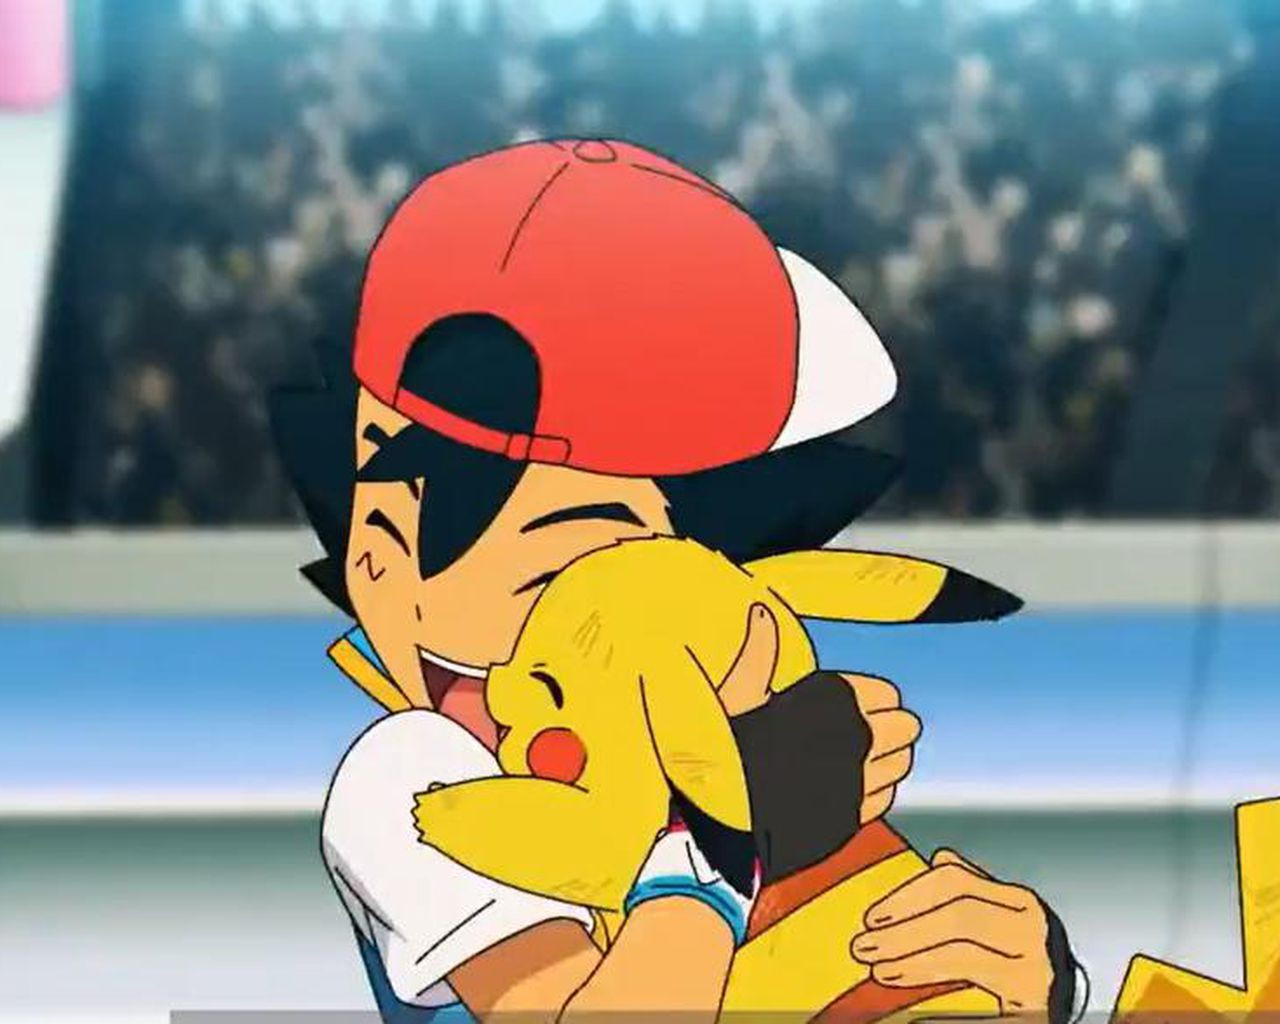 Ash Ketchum and Pikachu are leaving Pokemon after 25 years - Xfire